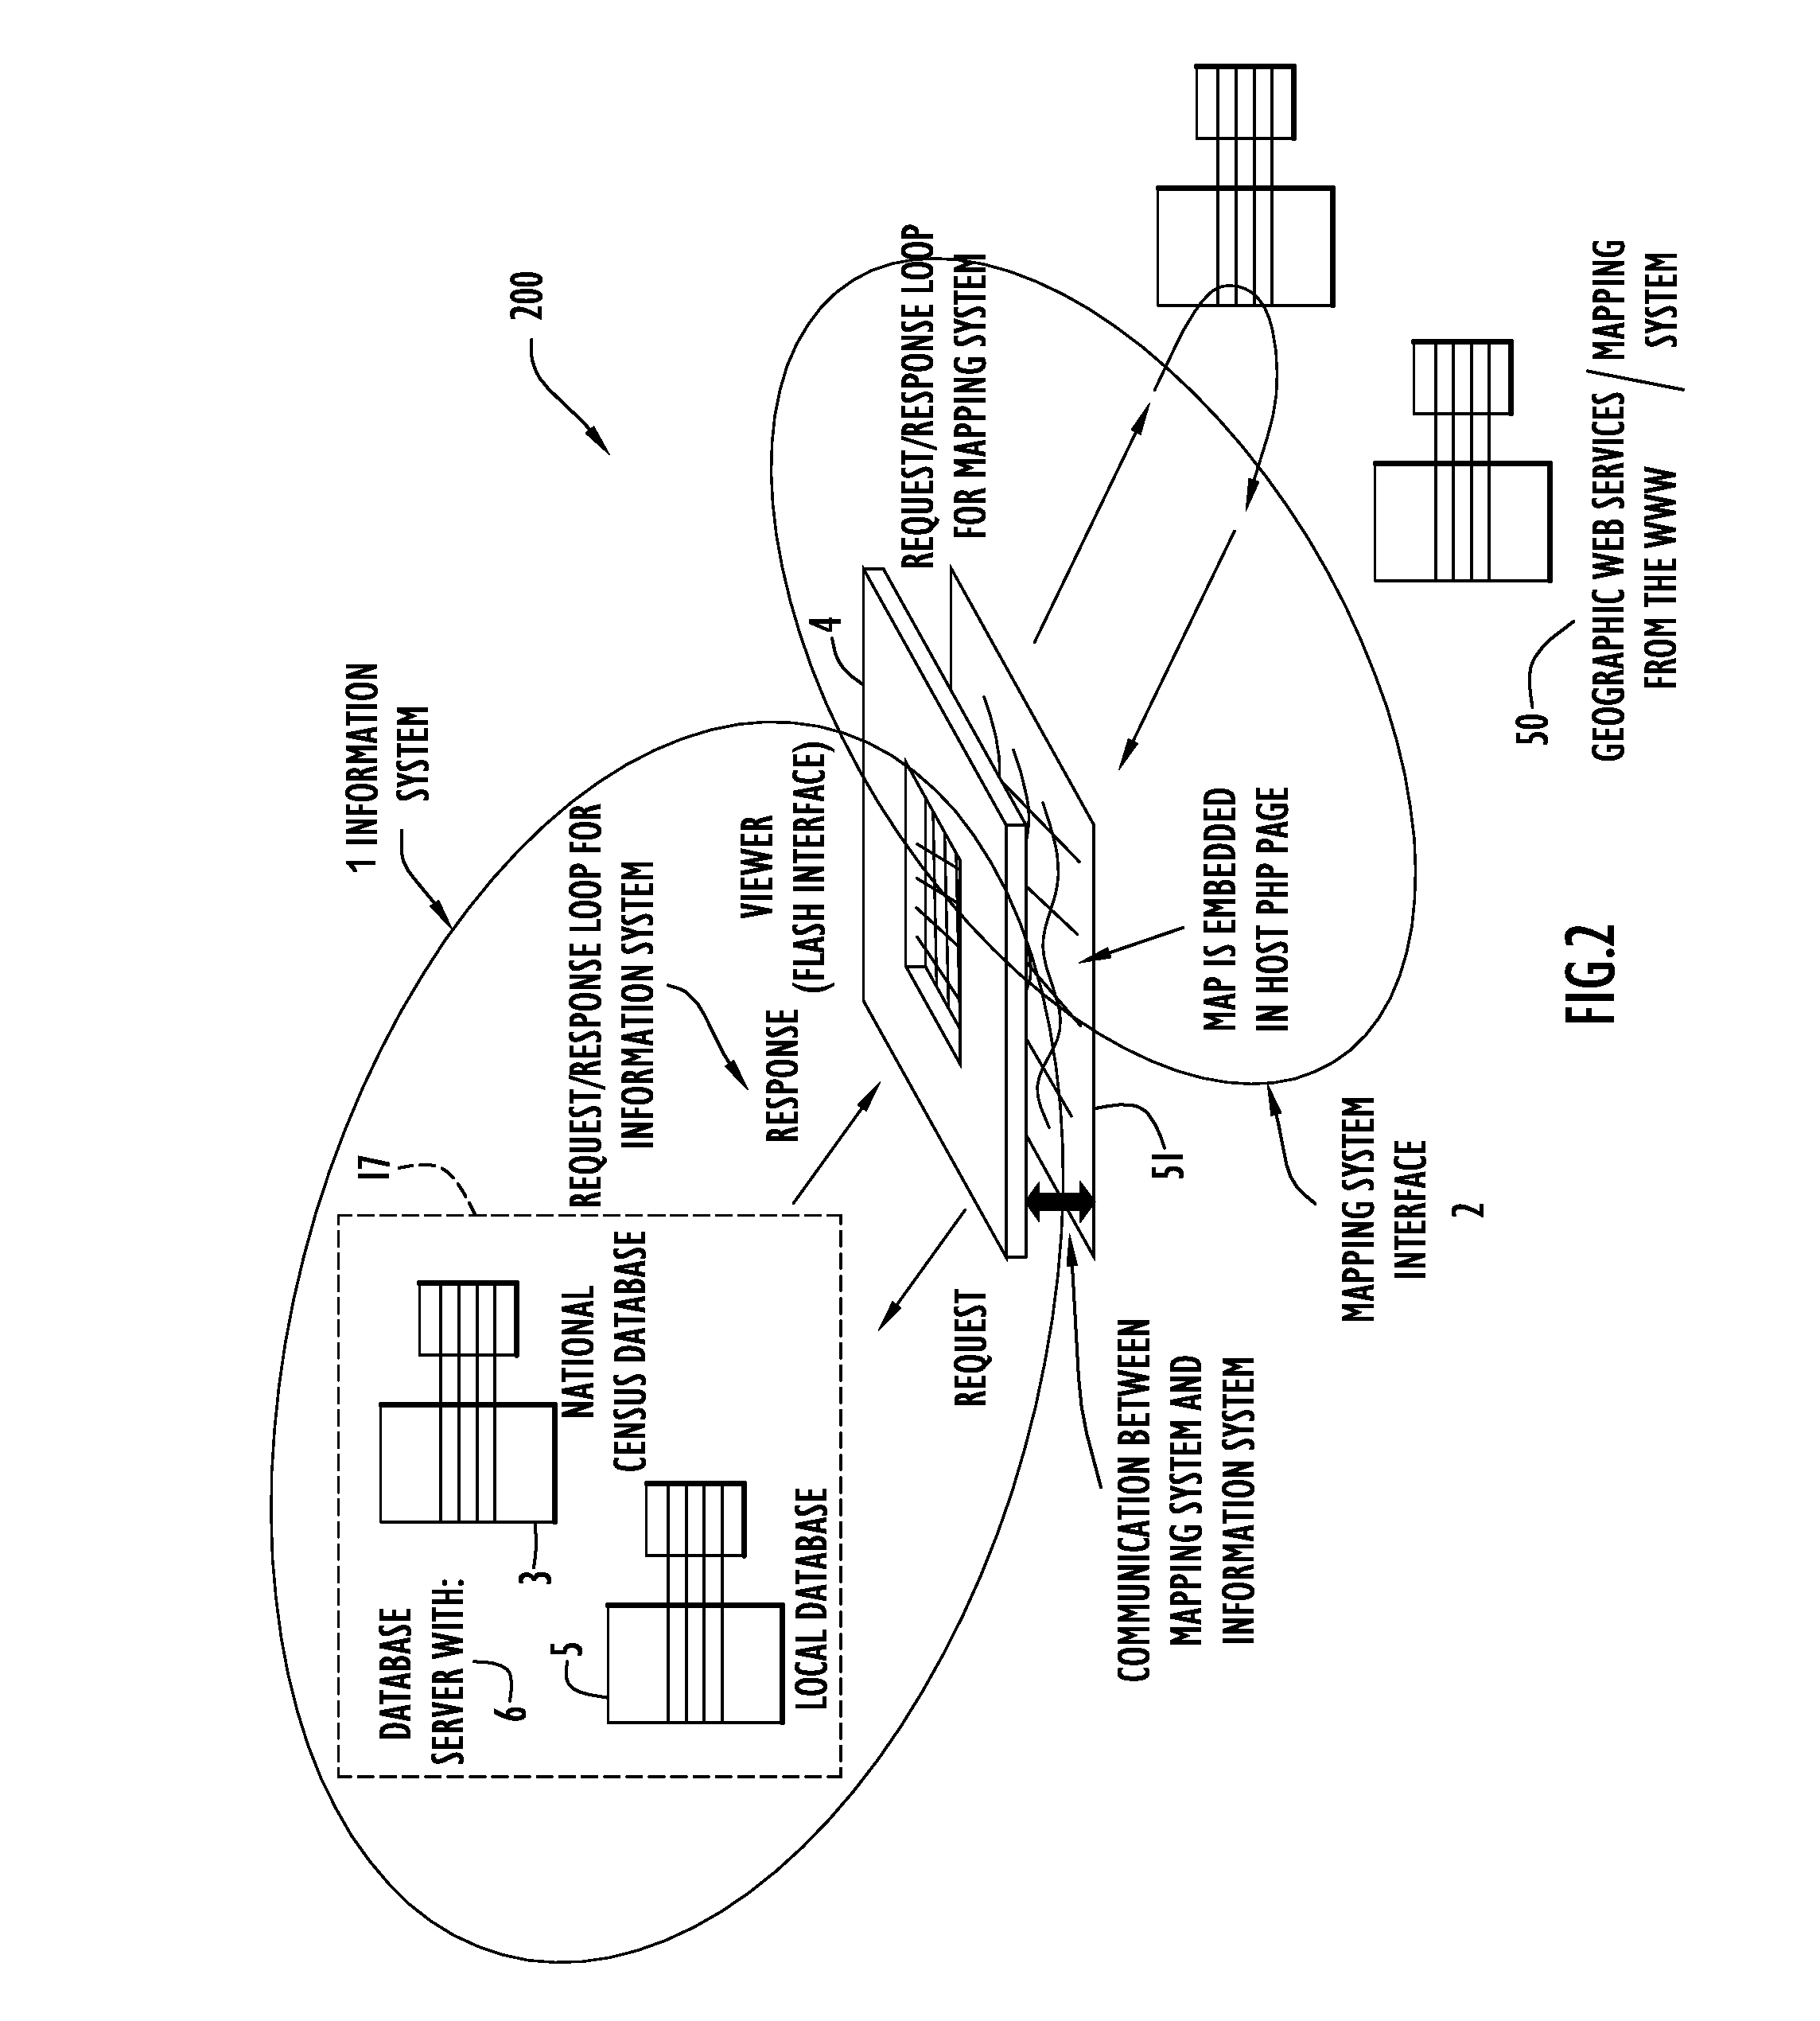 System and Method of Overlaying and Integrating Data with Geographic Mapping Applications